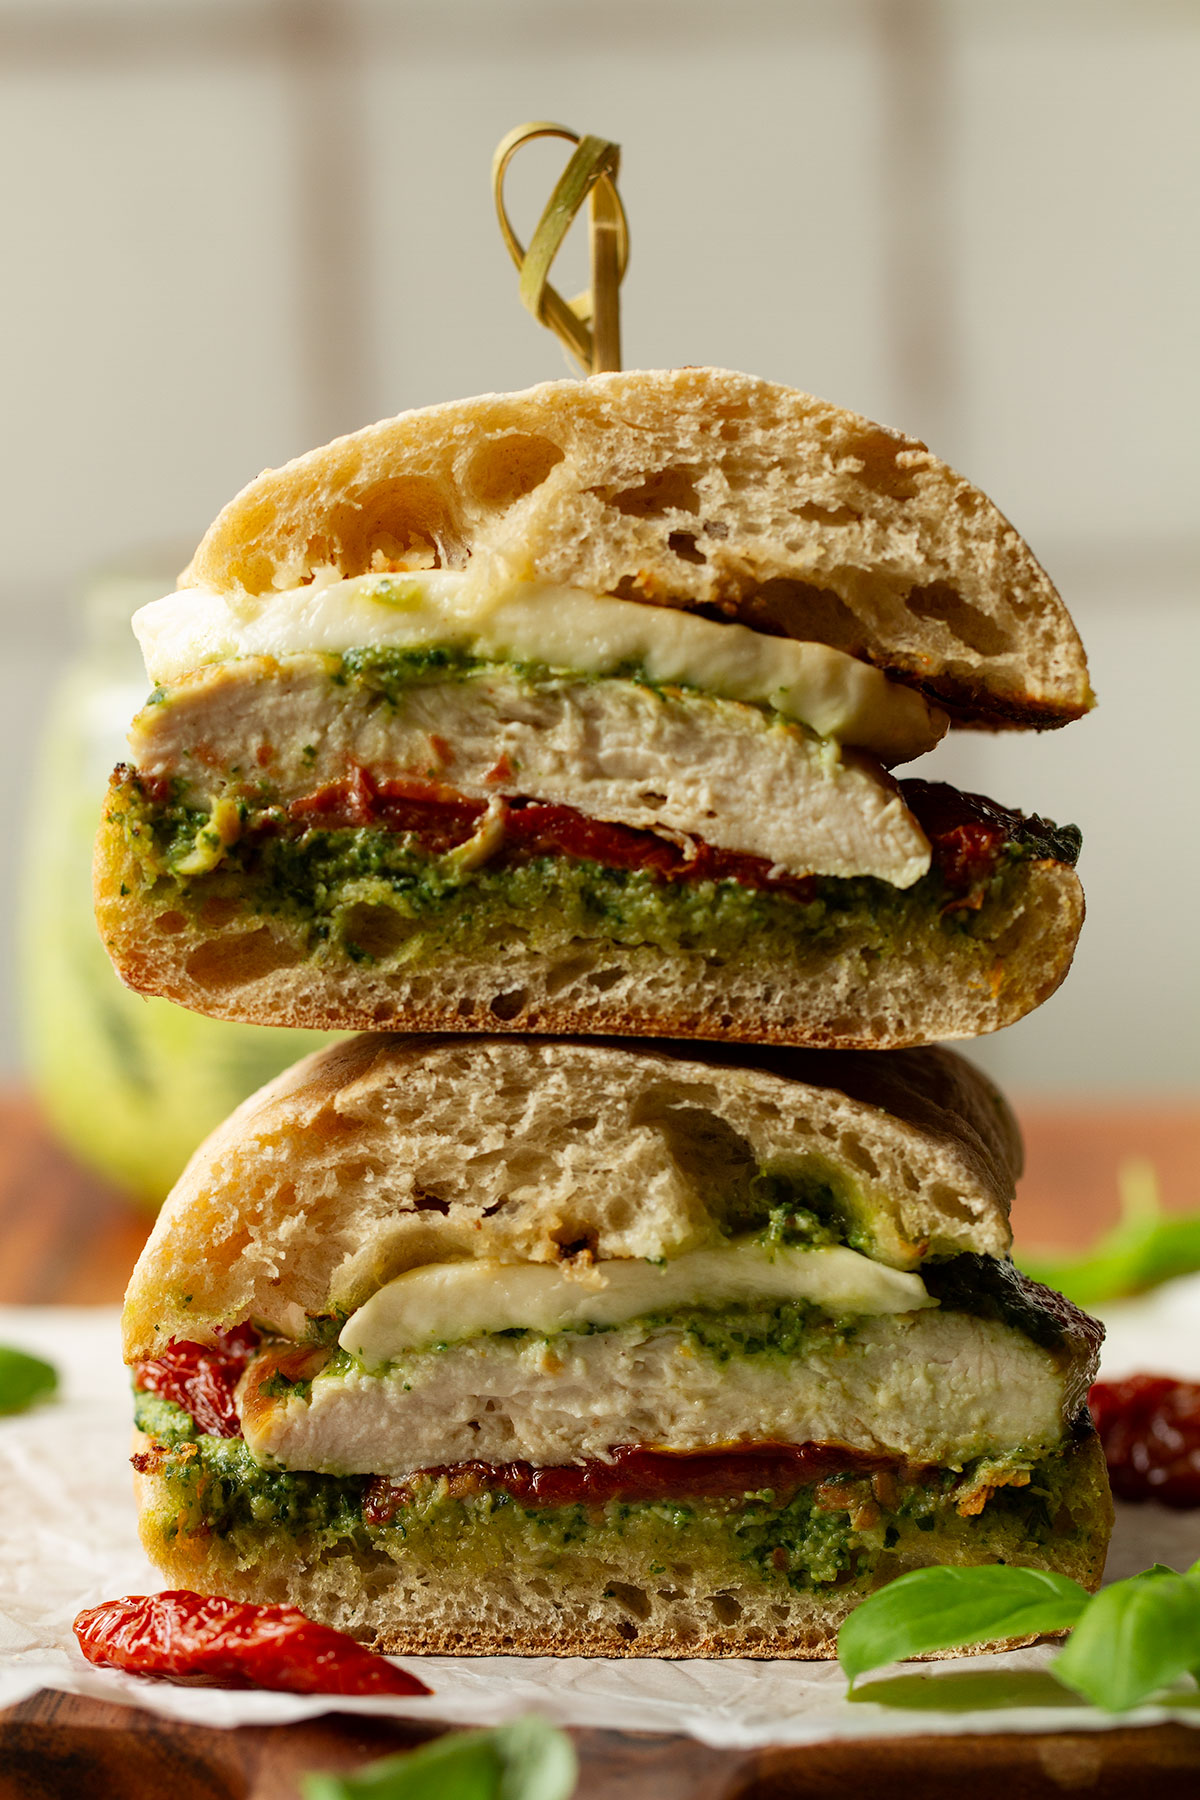 A cross section photograph of a serving of two chicken ciabatta sandwiches.